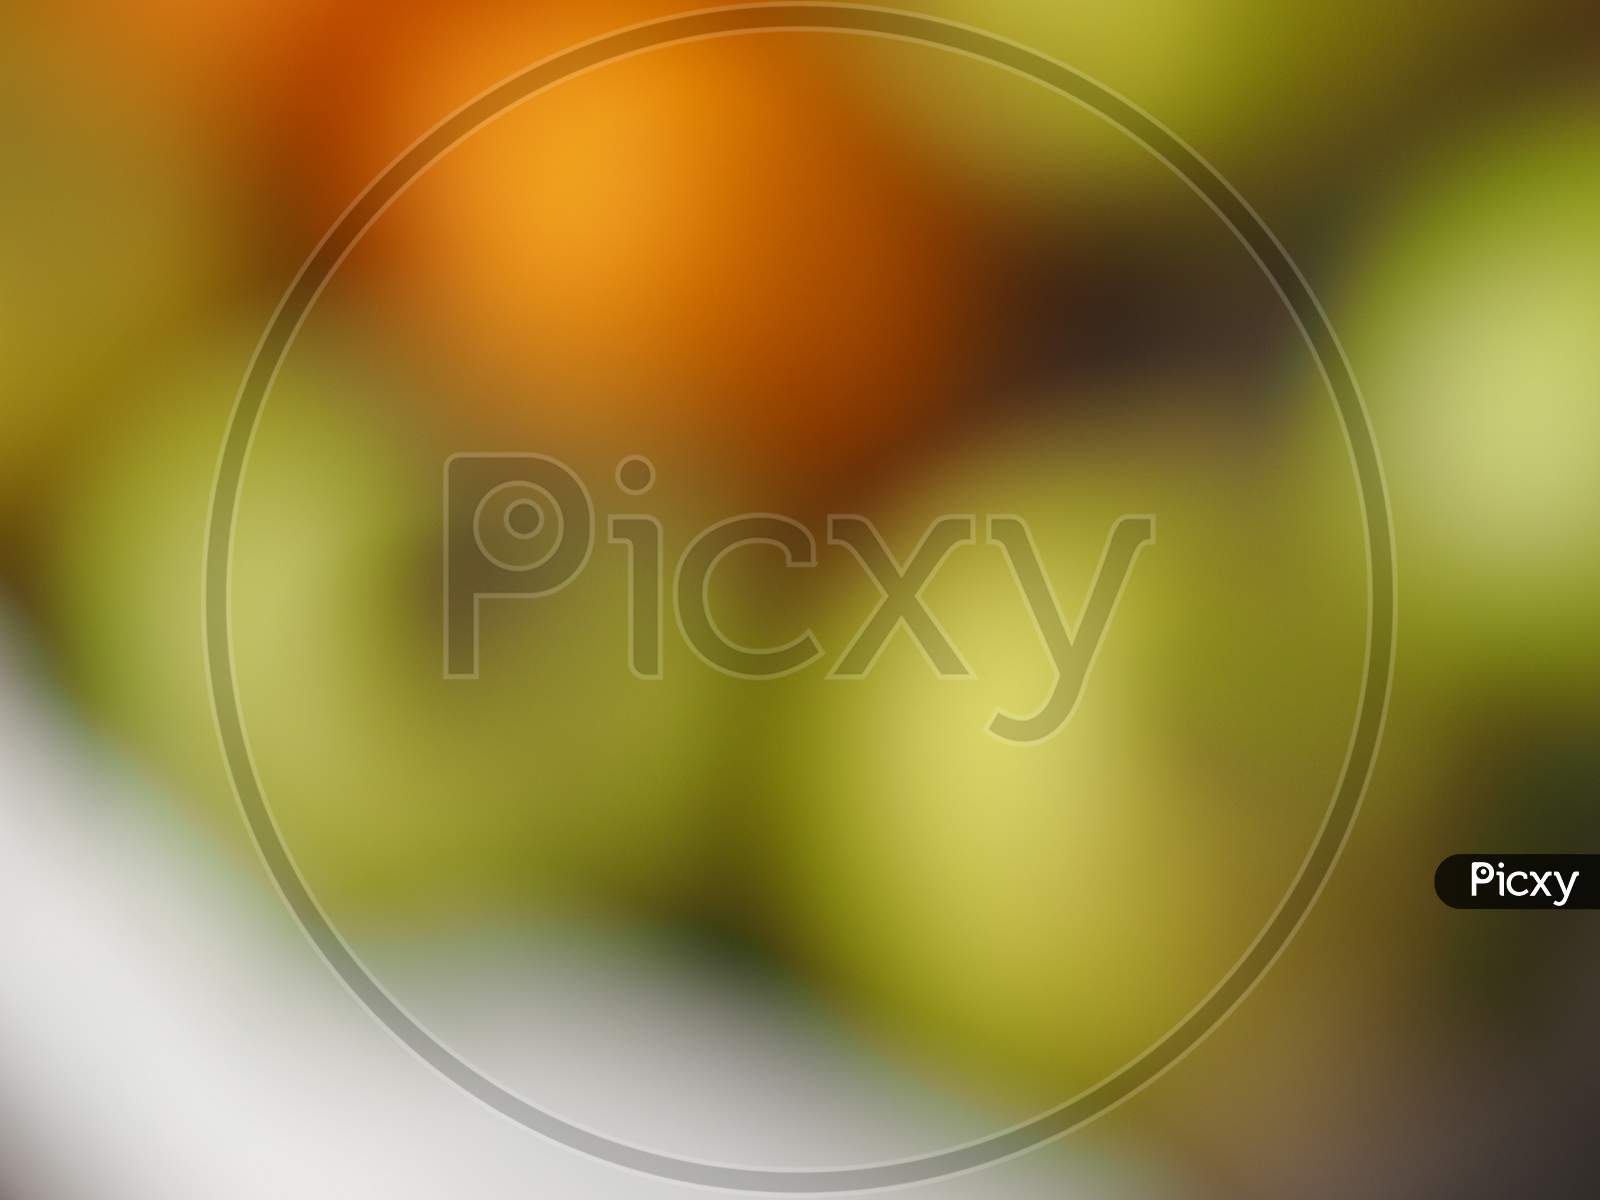 Abstract Orange And Green Blur Background